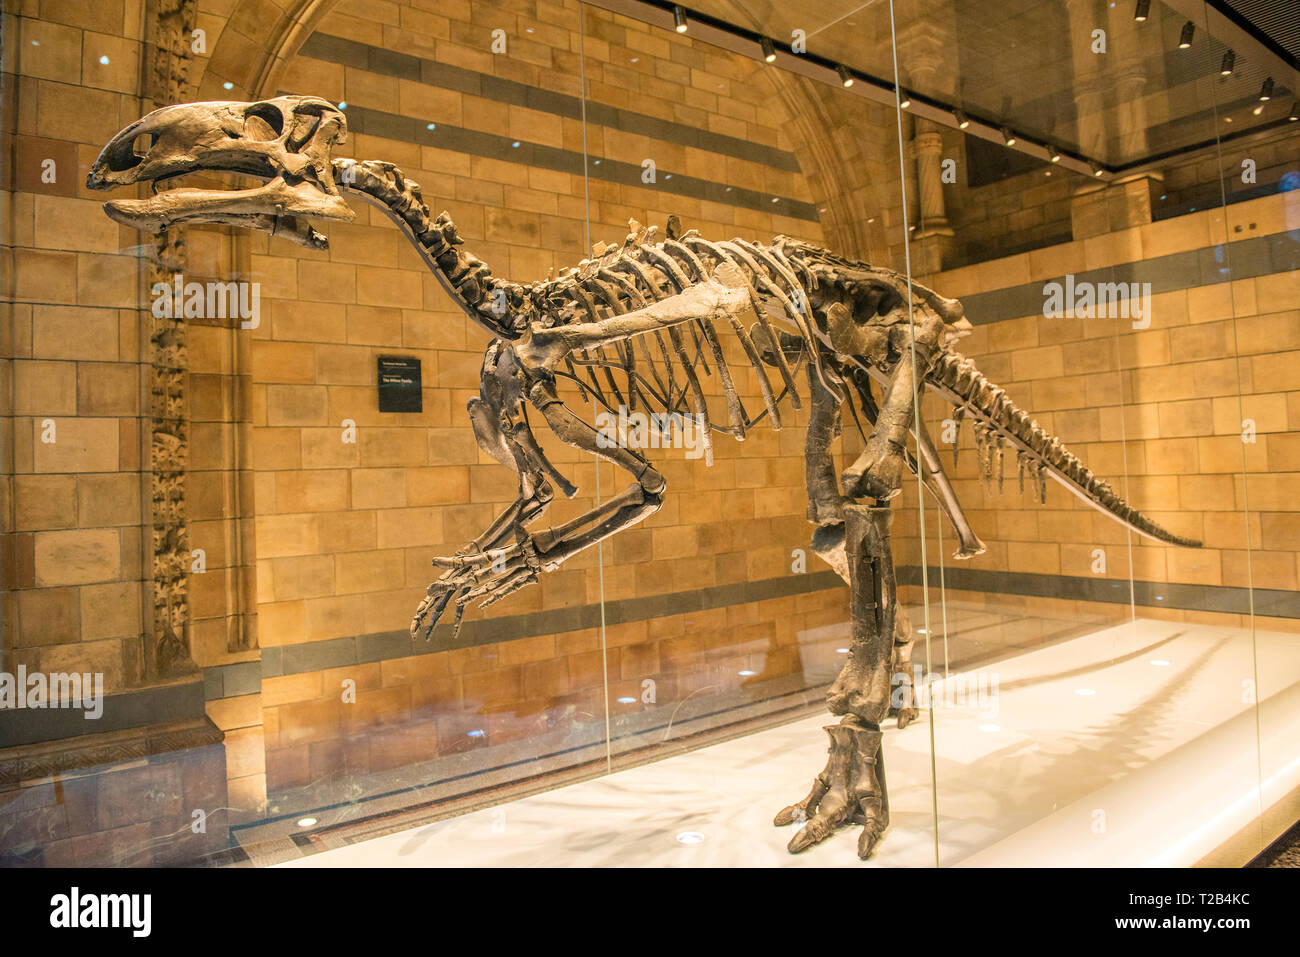 LONDON, UK - MARCH 22, 2019: Dinosaur (Mantellisaurus) exhibited in Natural History Museum is one of the most complete skeletons ever found in England Stock Photo